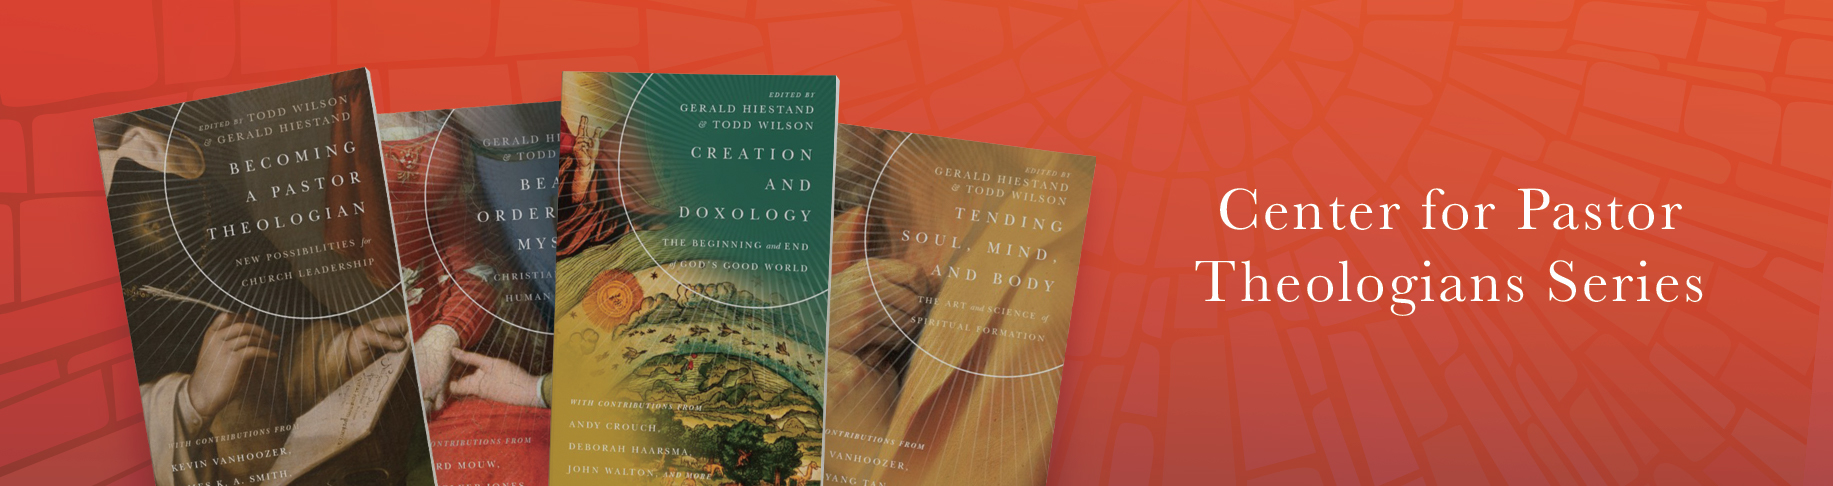 Center for Pastor Theologians Series